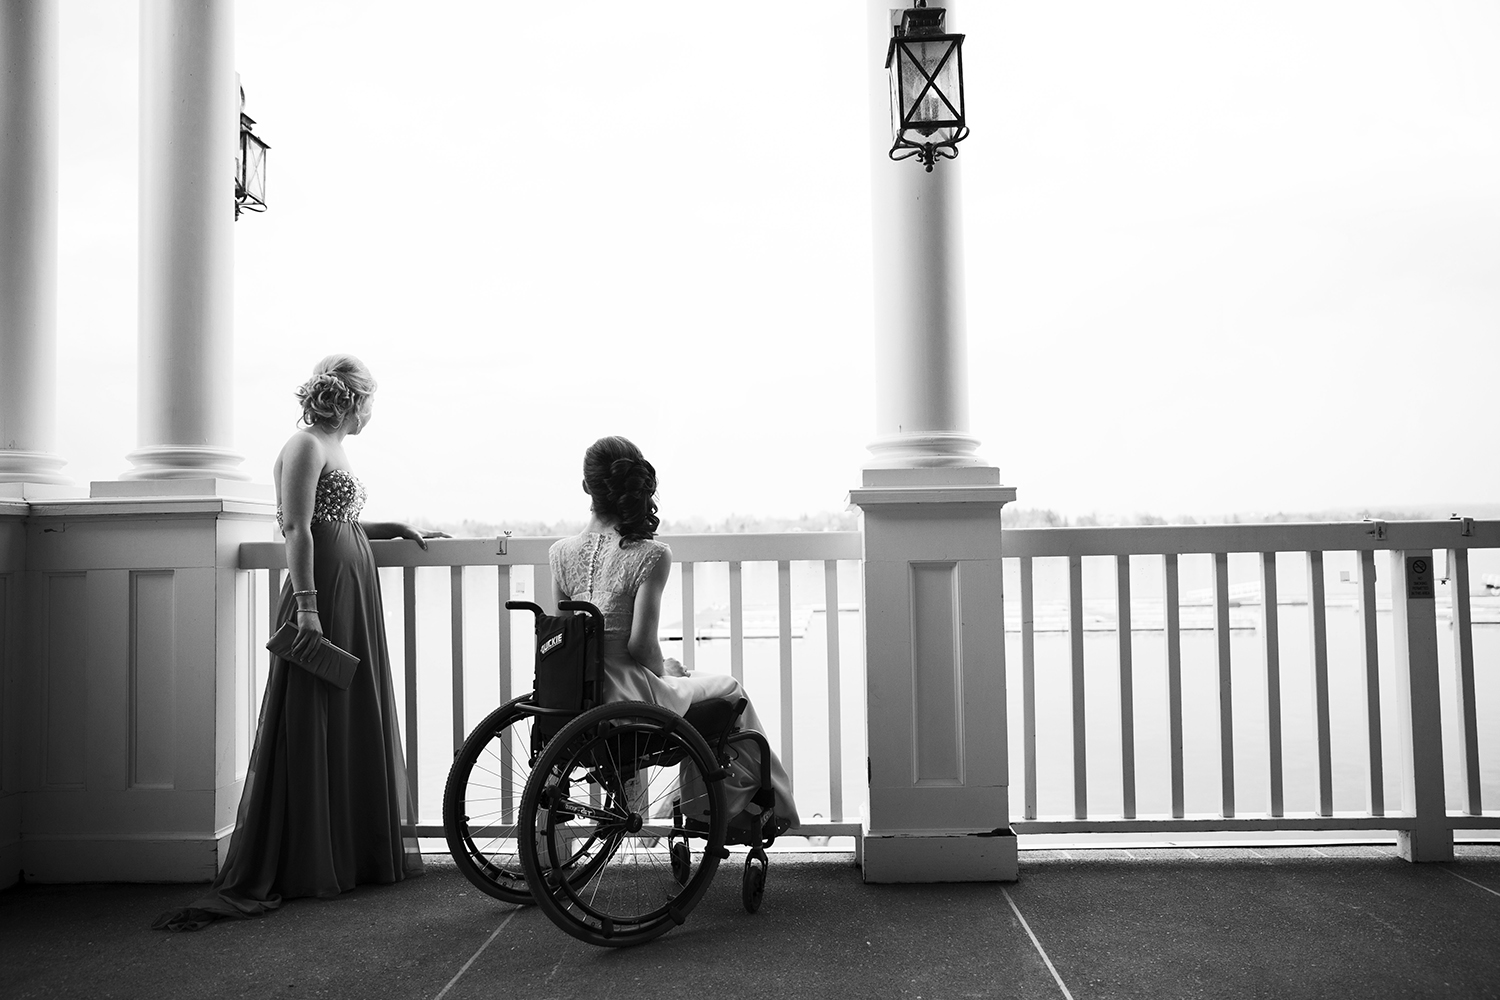 Gena and her friend, Mary, 16, look over the balcony after dinner at the Skaneateles Country Club in Skaneateles, NY.